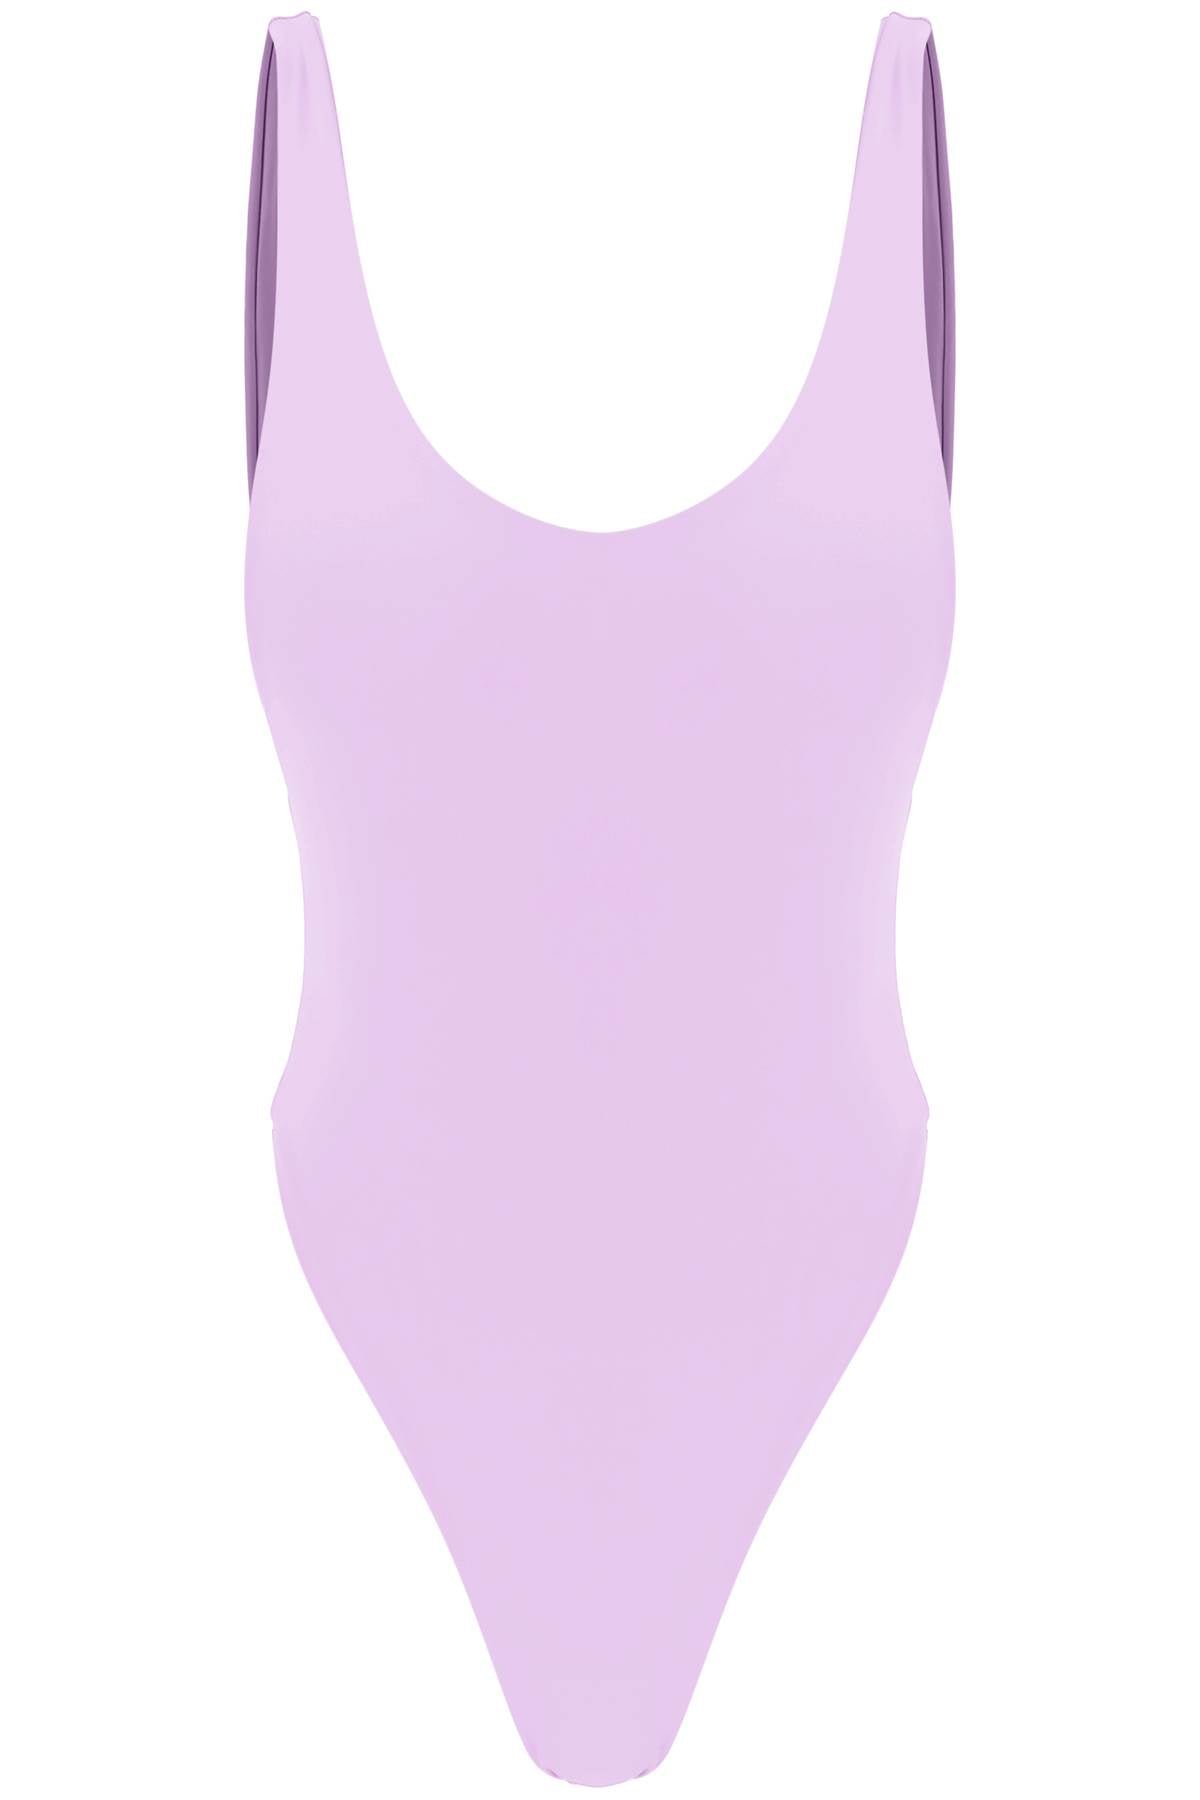 Reina olga 'funky' one-piece swimsuit FUNKY FADED NEON LILAC